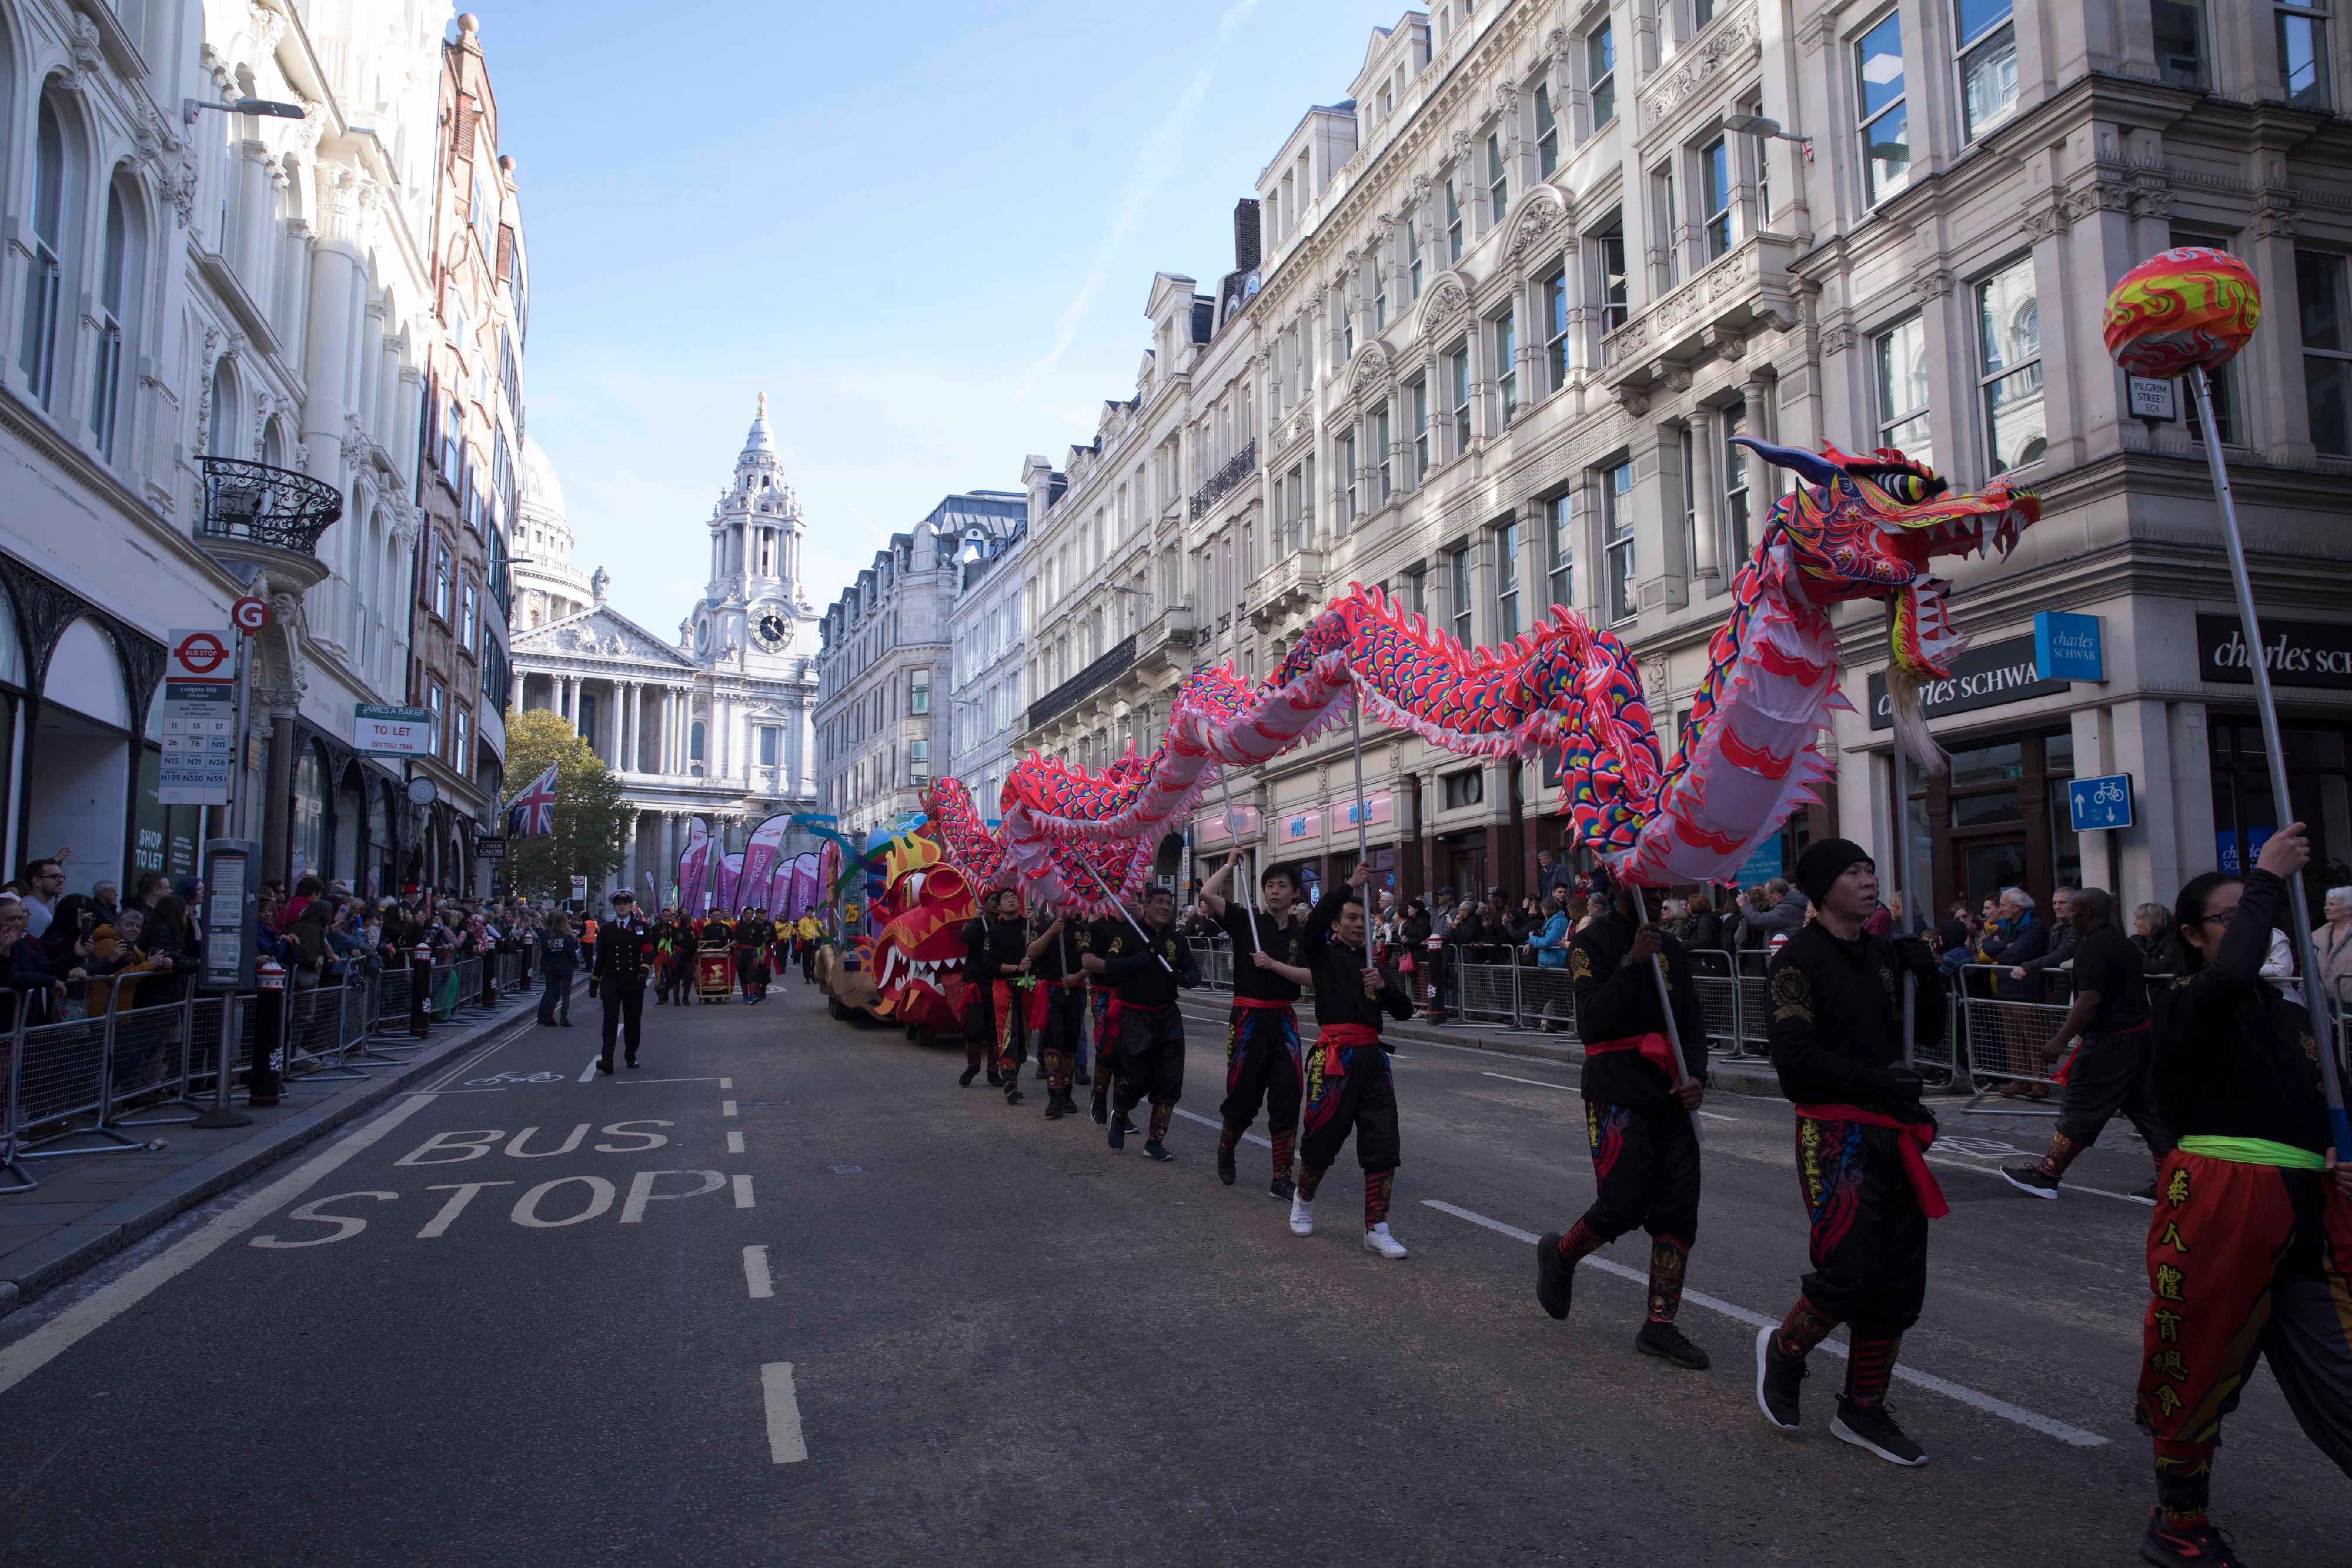 The Hong Kong Economic and Trade Office, London took part in the City of London Lord Mayor's Show on November 12 (London time) with a float highlighting Hong Kong's status as an international financial centre. A total of 25 flag bearers marched alongside the float, commemorating the 25th anniversary of the establishment of the Hong Kong Special Administrative Region. Photo shows the float passing through the streets of London. 